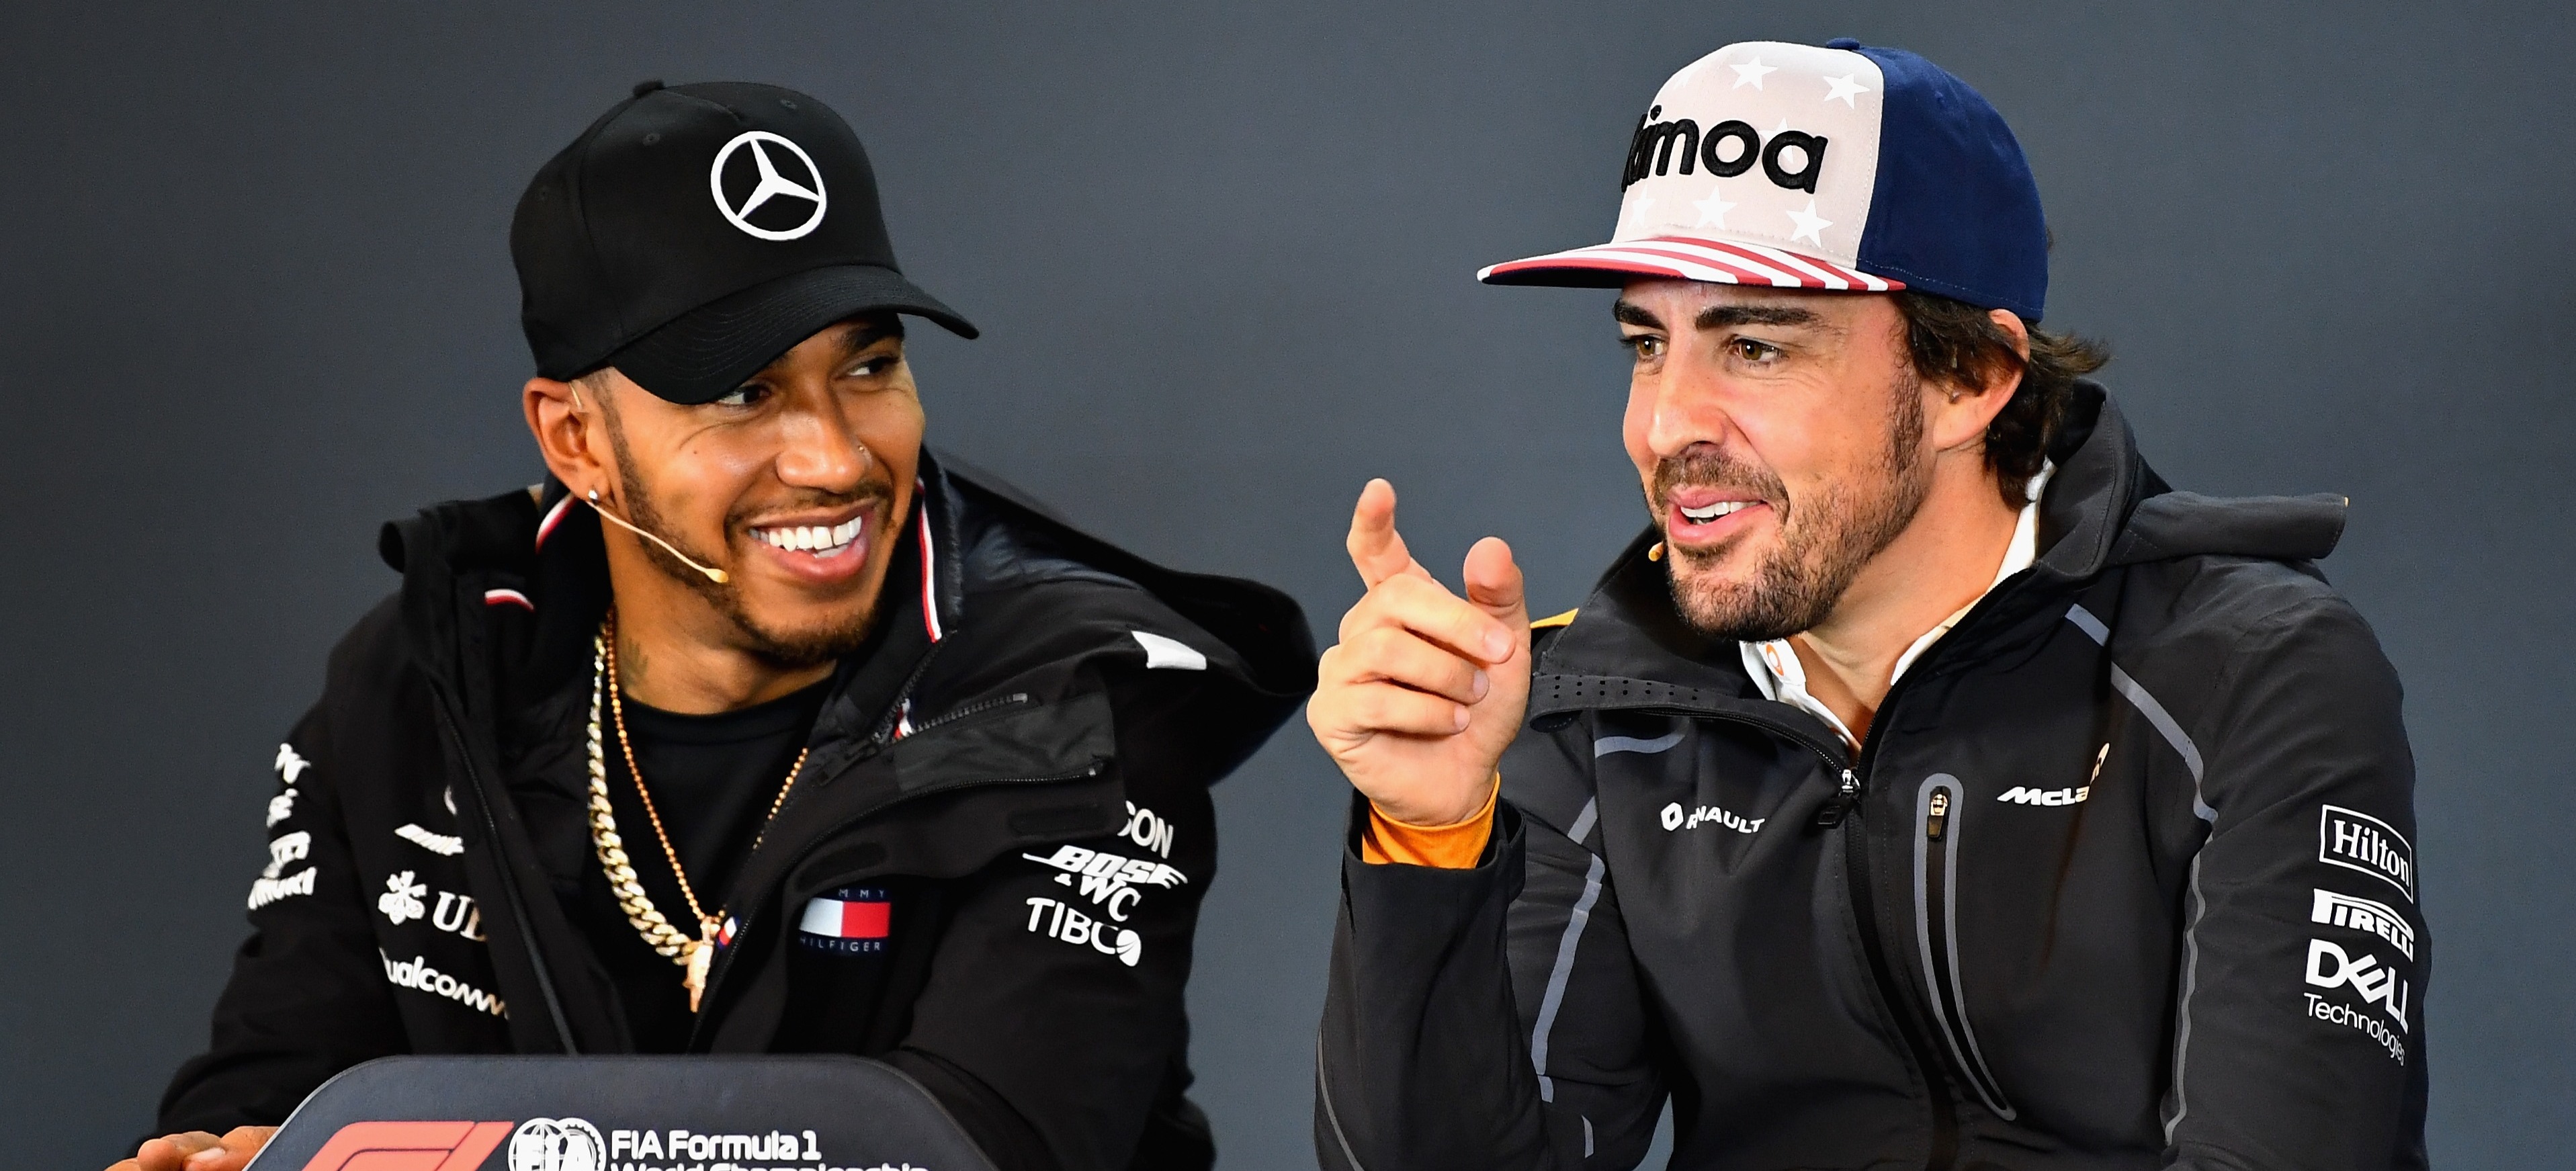 Alonso and Hamilton are no longer such fierce enemies